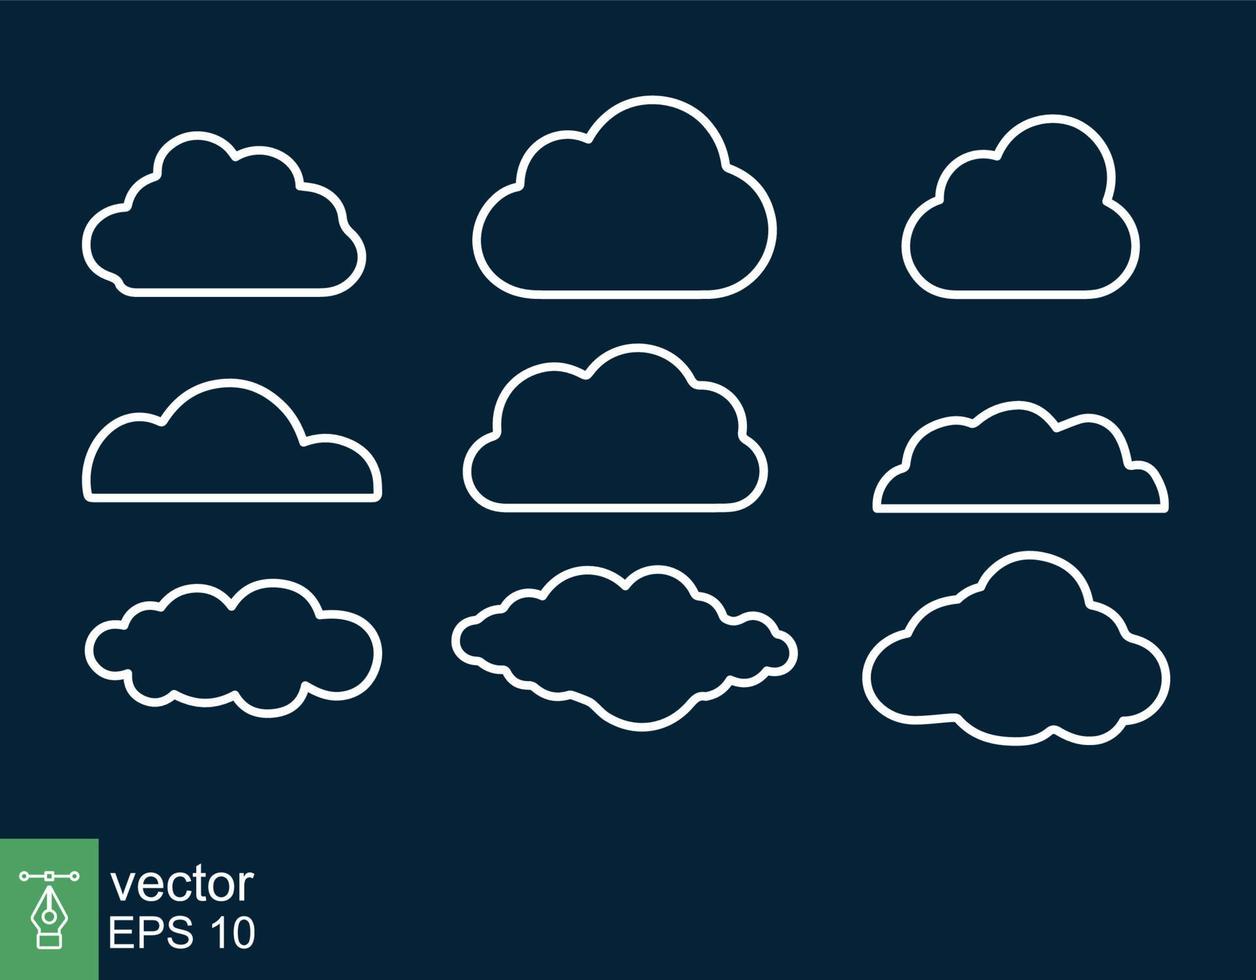 White clouds on dark background. Simple outline style. Banner icons vector design elements, line symbol. EPS 10.